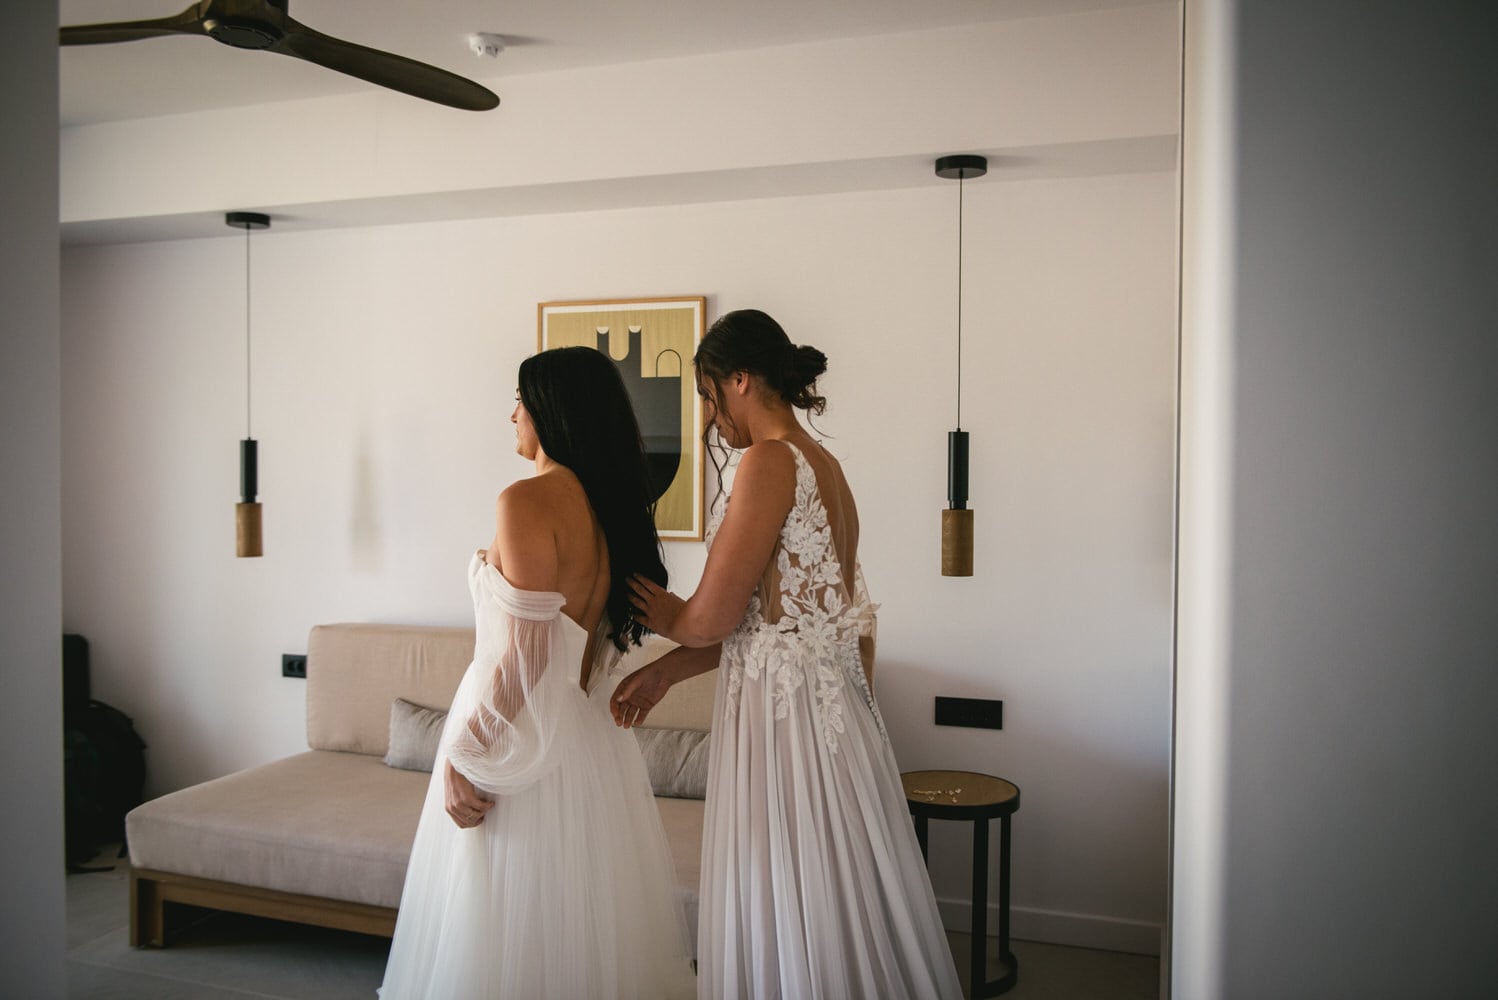 One bride helping the other with her dress, shared moments before their Corfu elopement.